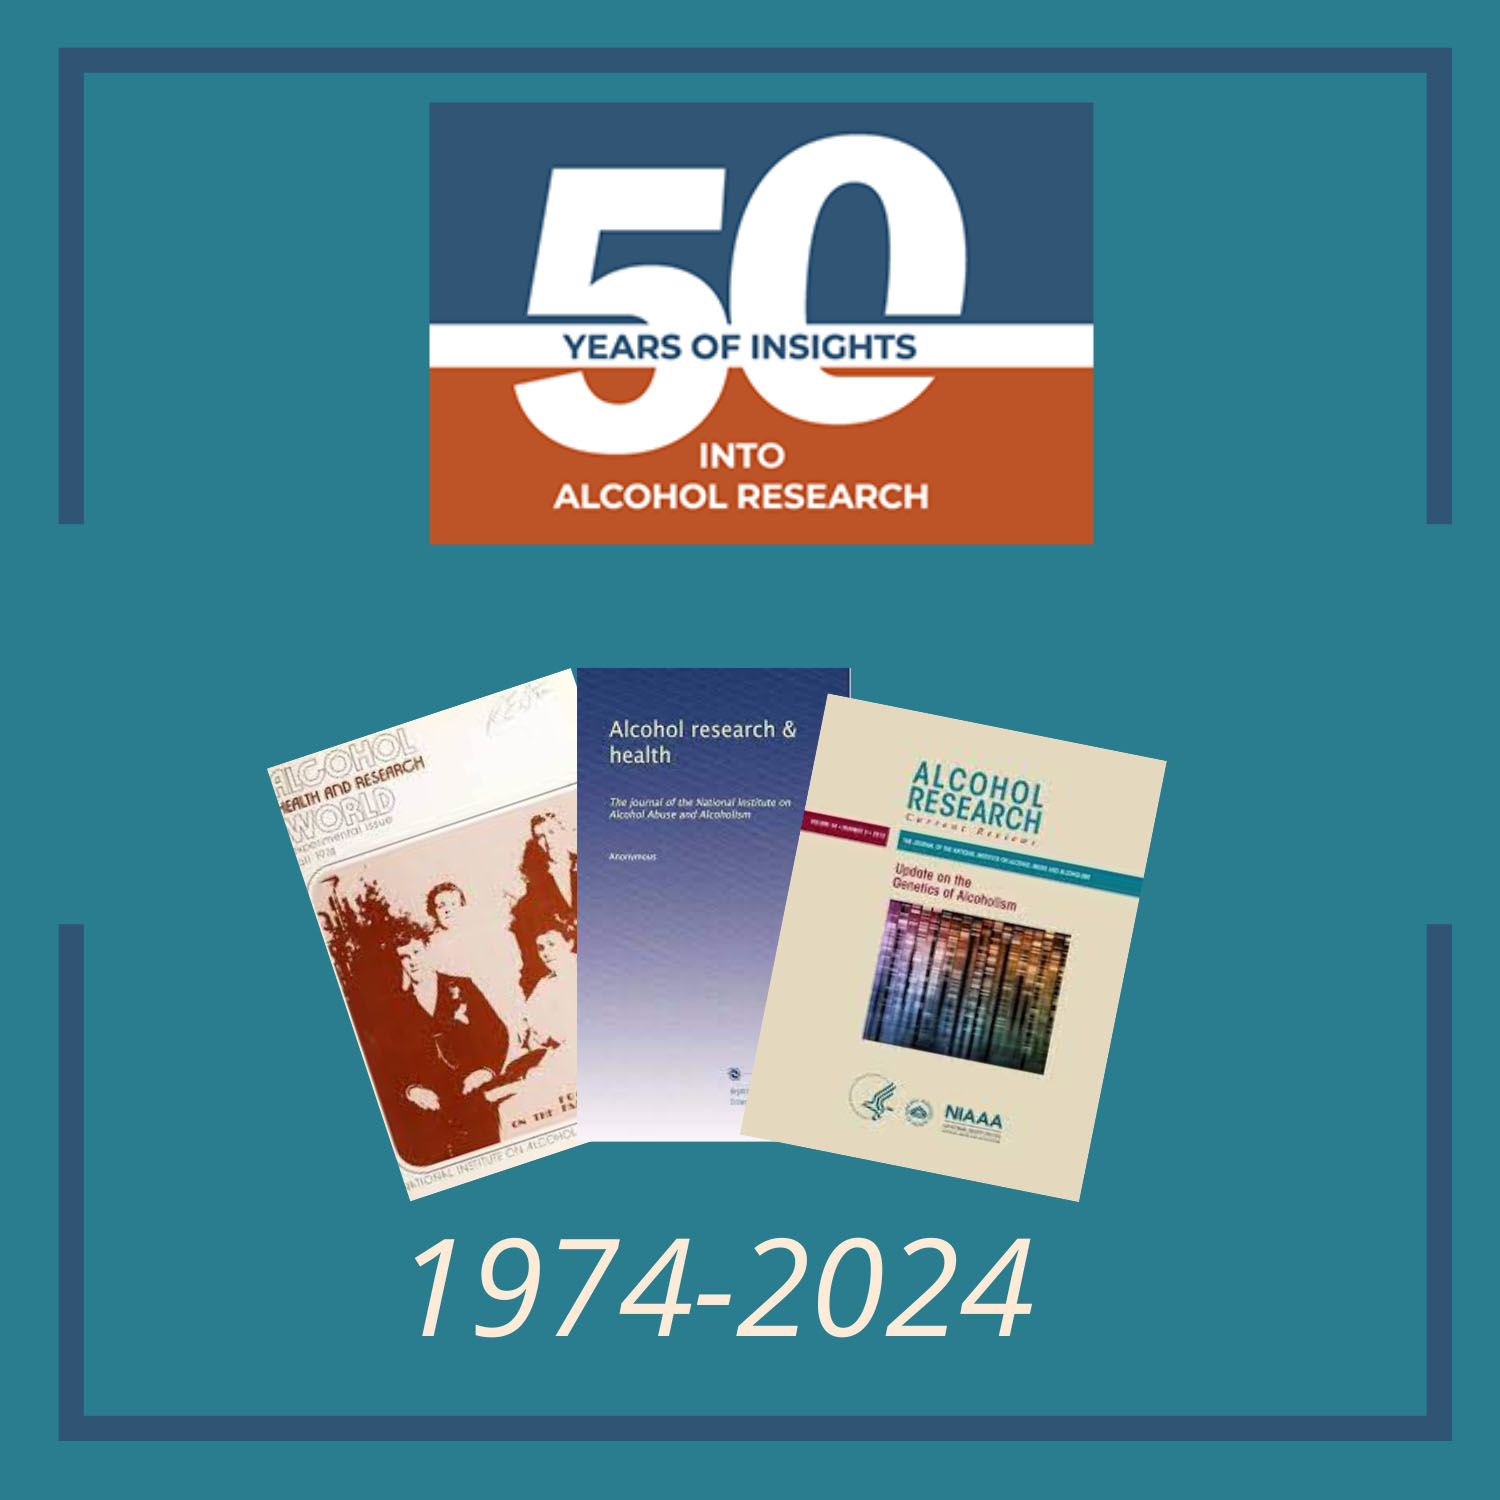 50 years of insights into alcohol research, 1974-2024.